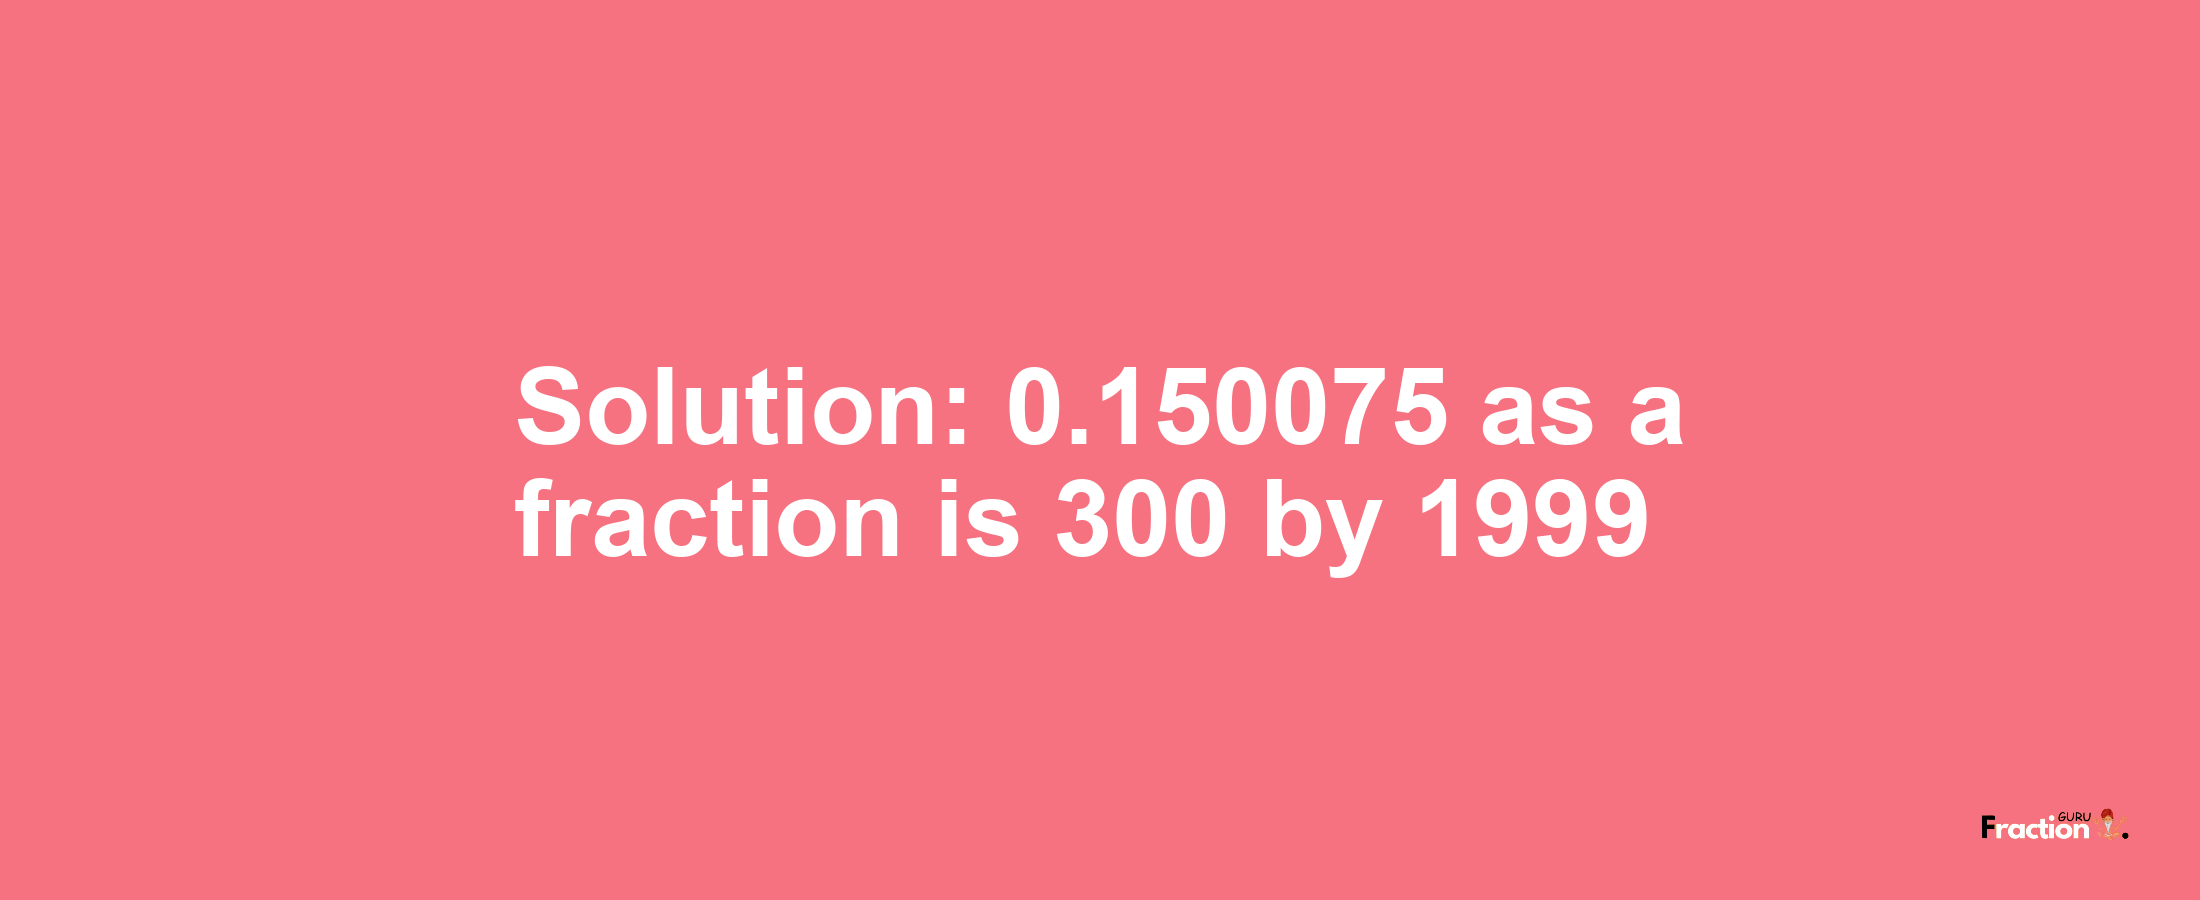 Solution:0.150075 as a fraction is 300/1999